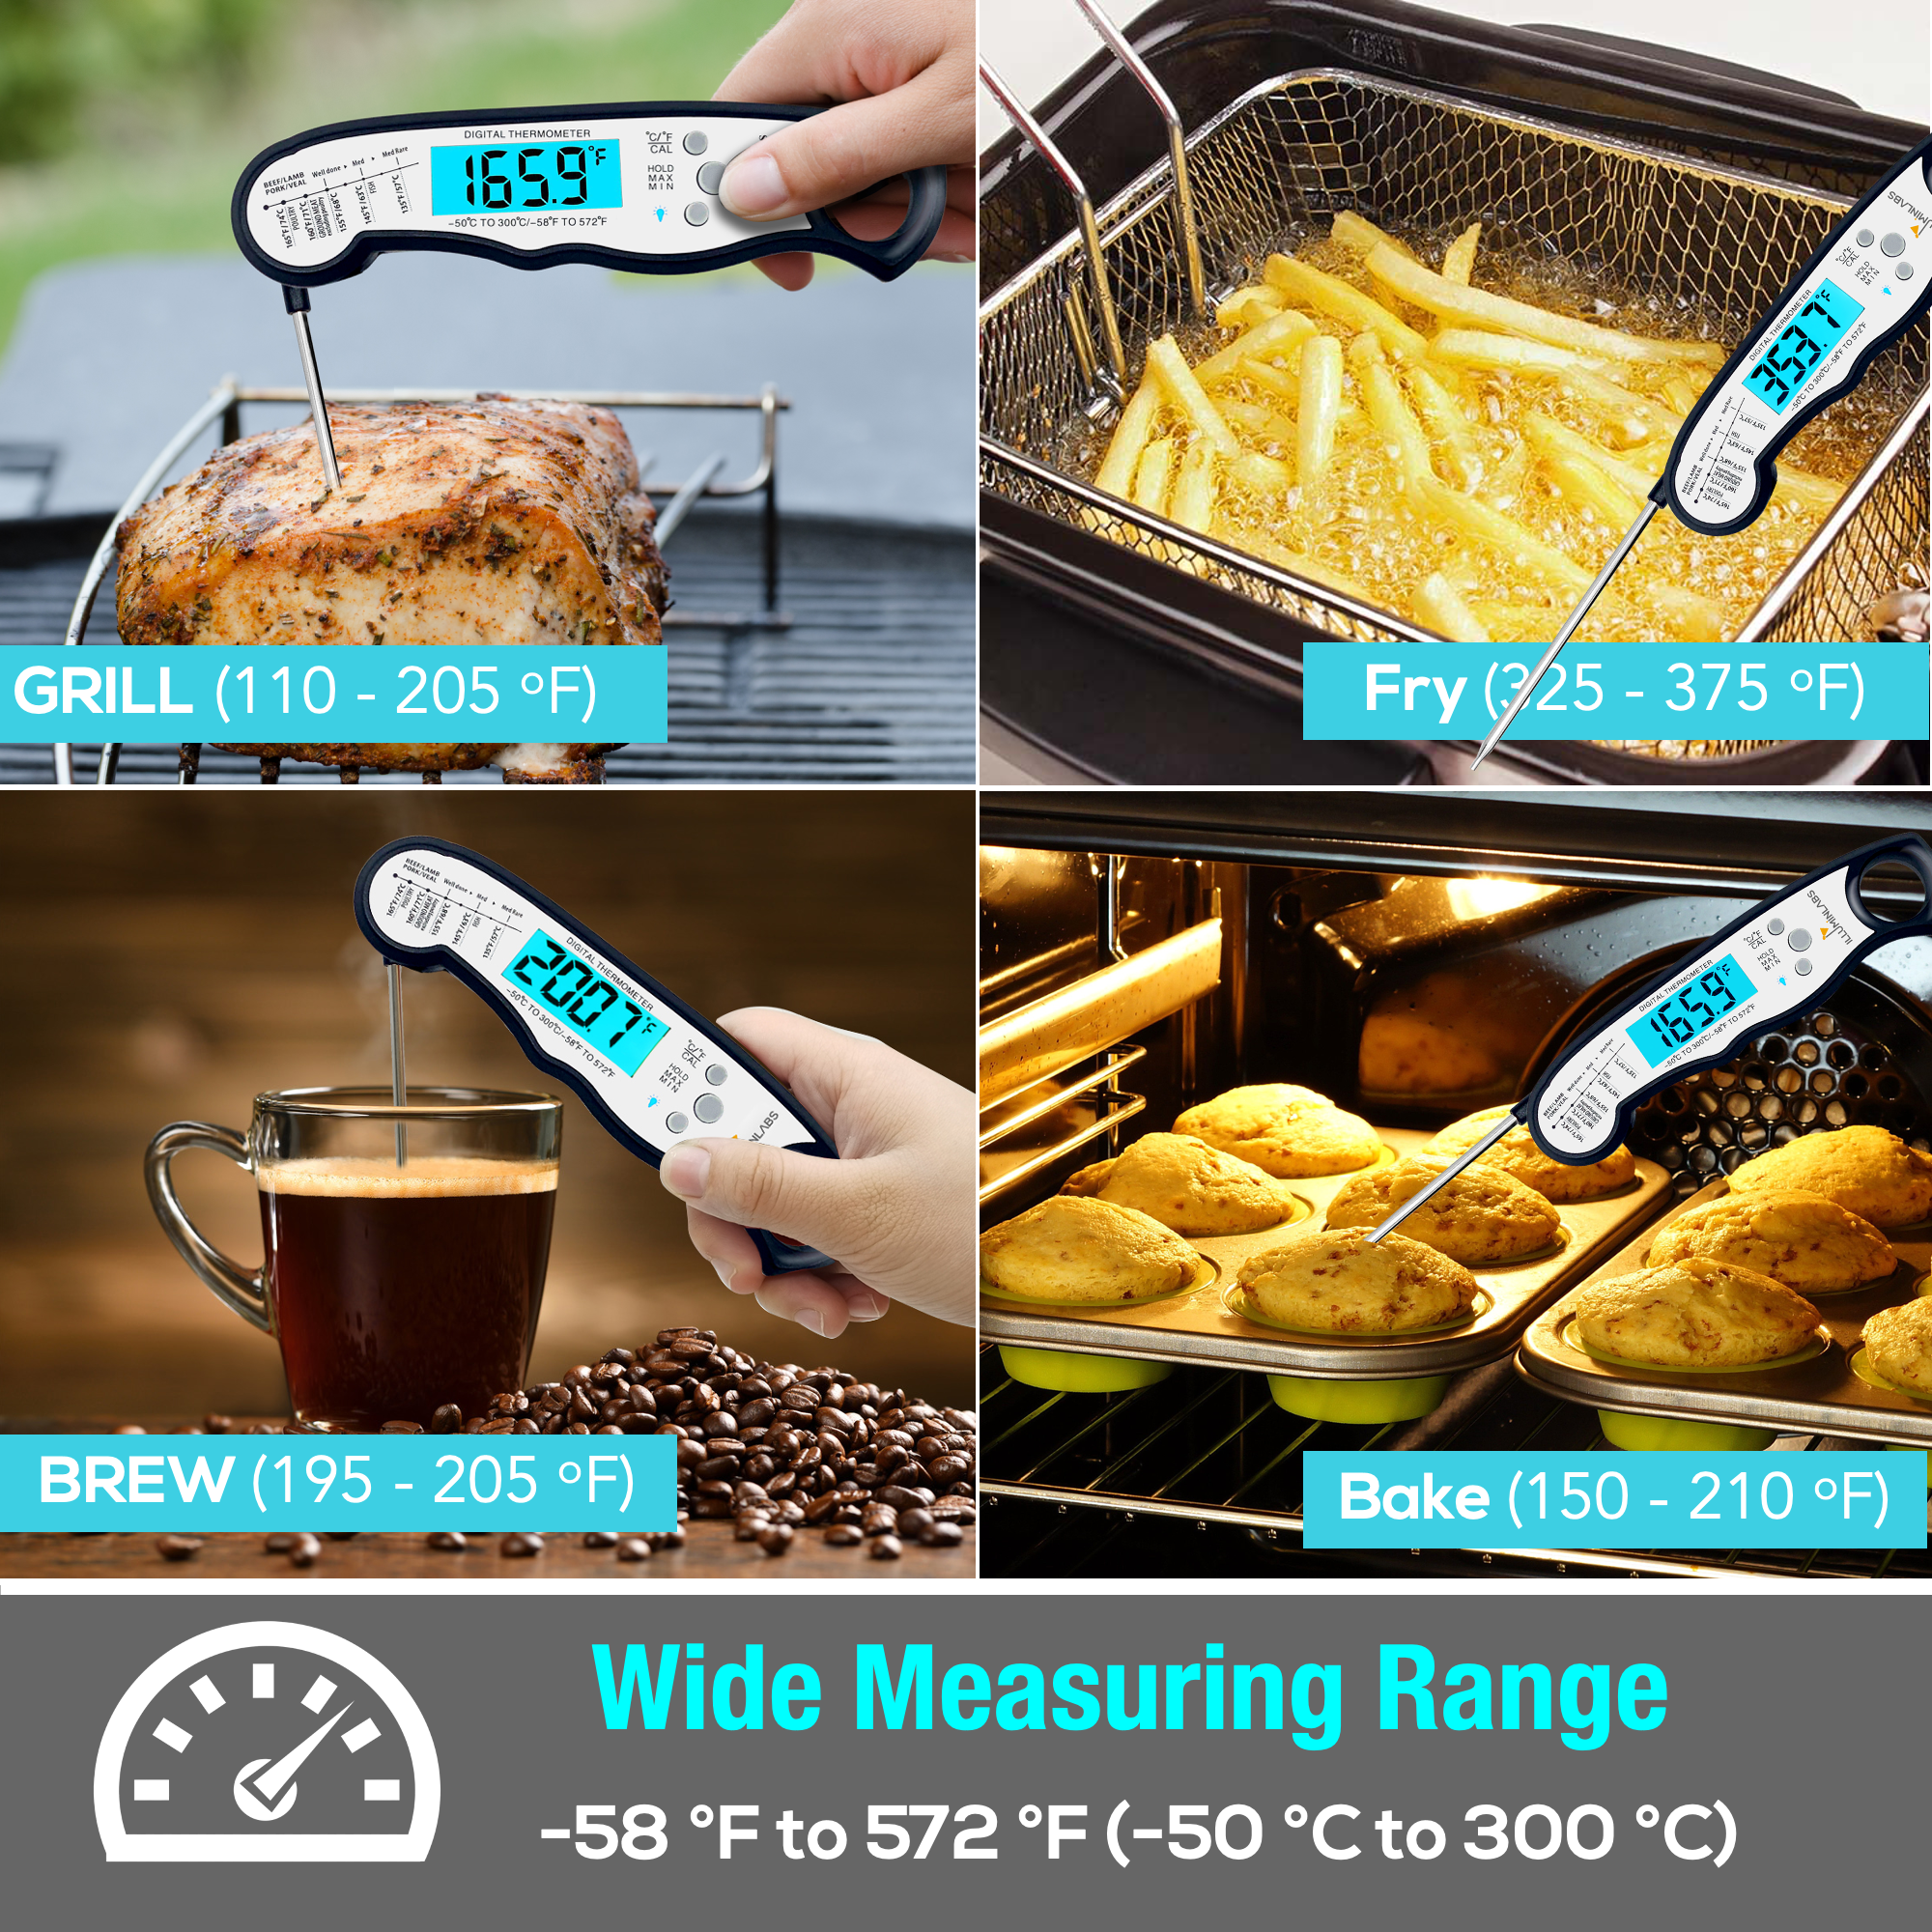 Illuminlabs Meat Thermometer - Instant Read Digital Food Thermometer for Cooking, Candy, Oven, Grill and Deep Fry. Accurate and Wide-Range Kitchen Thermometer with Probe, Waterproof, Pre-Calibrated - image 4 of 9